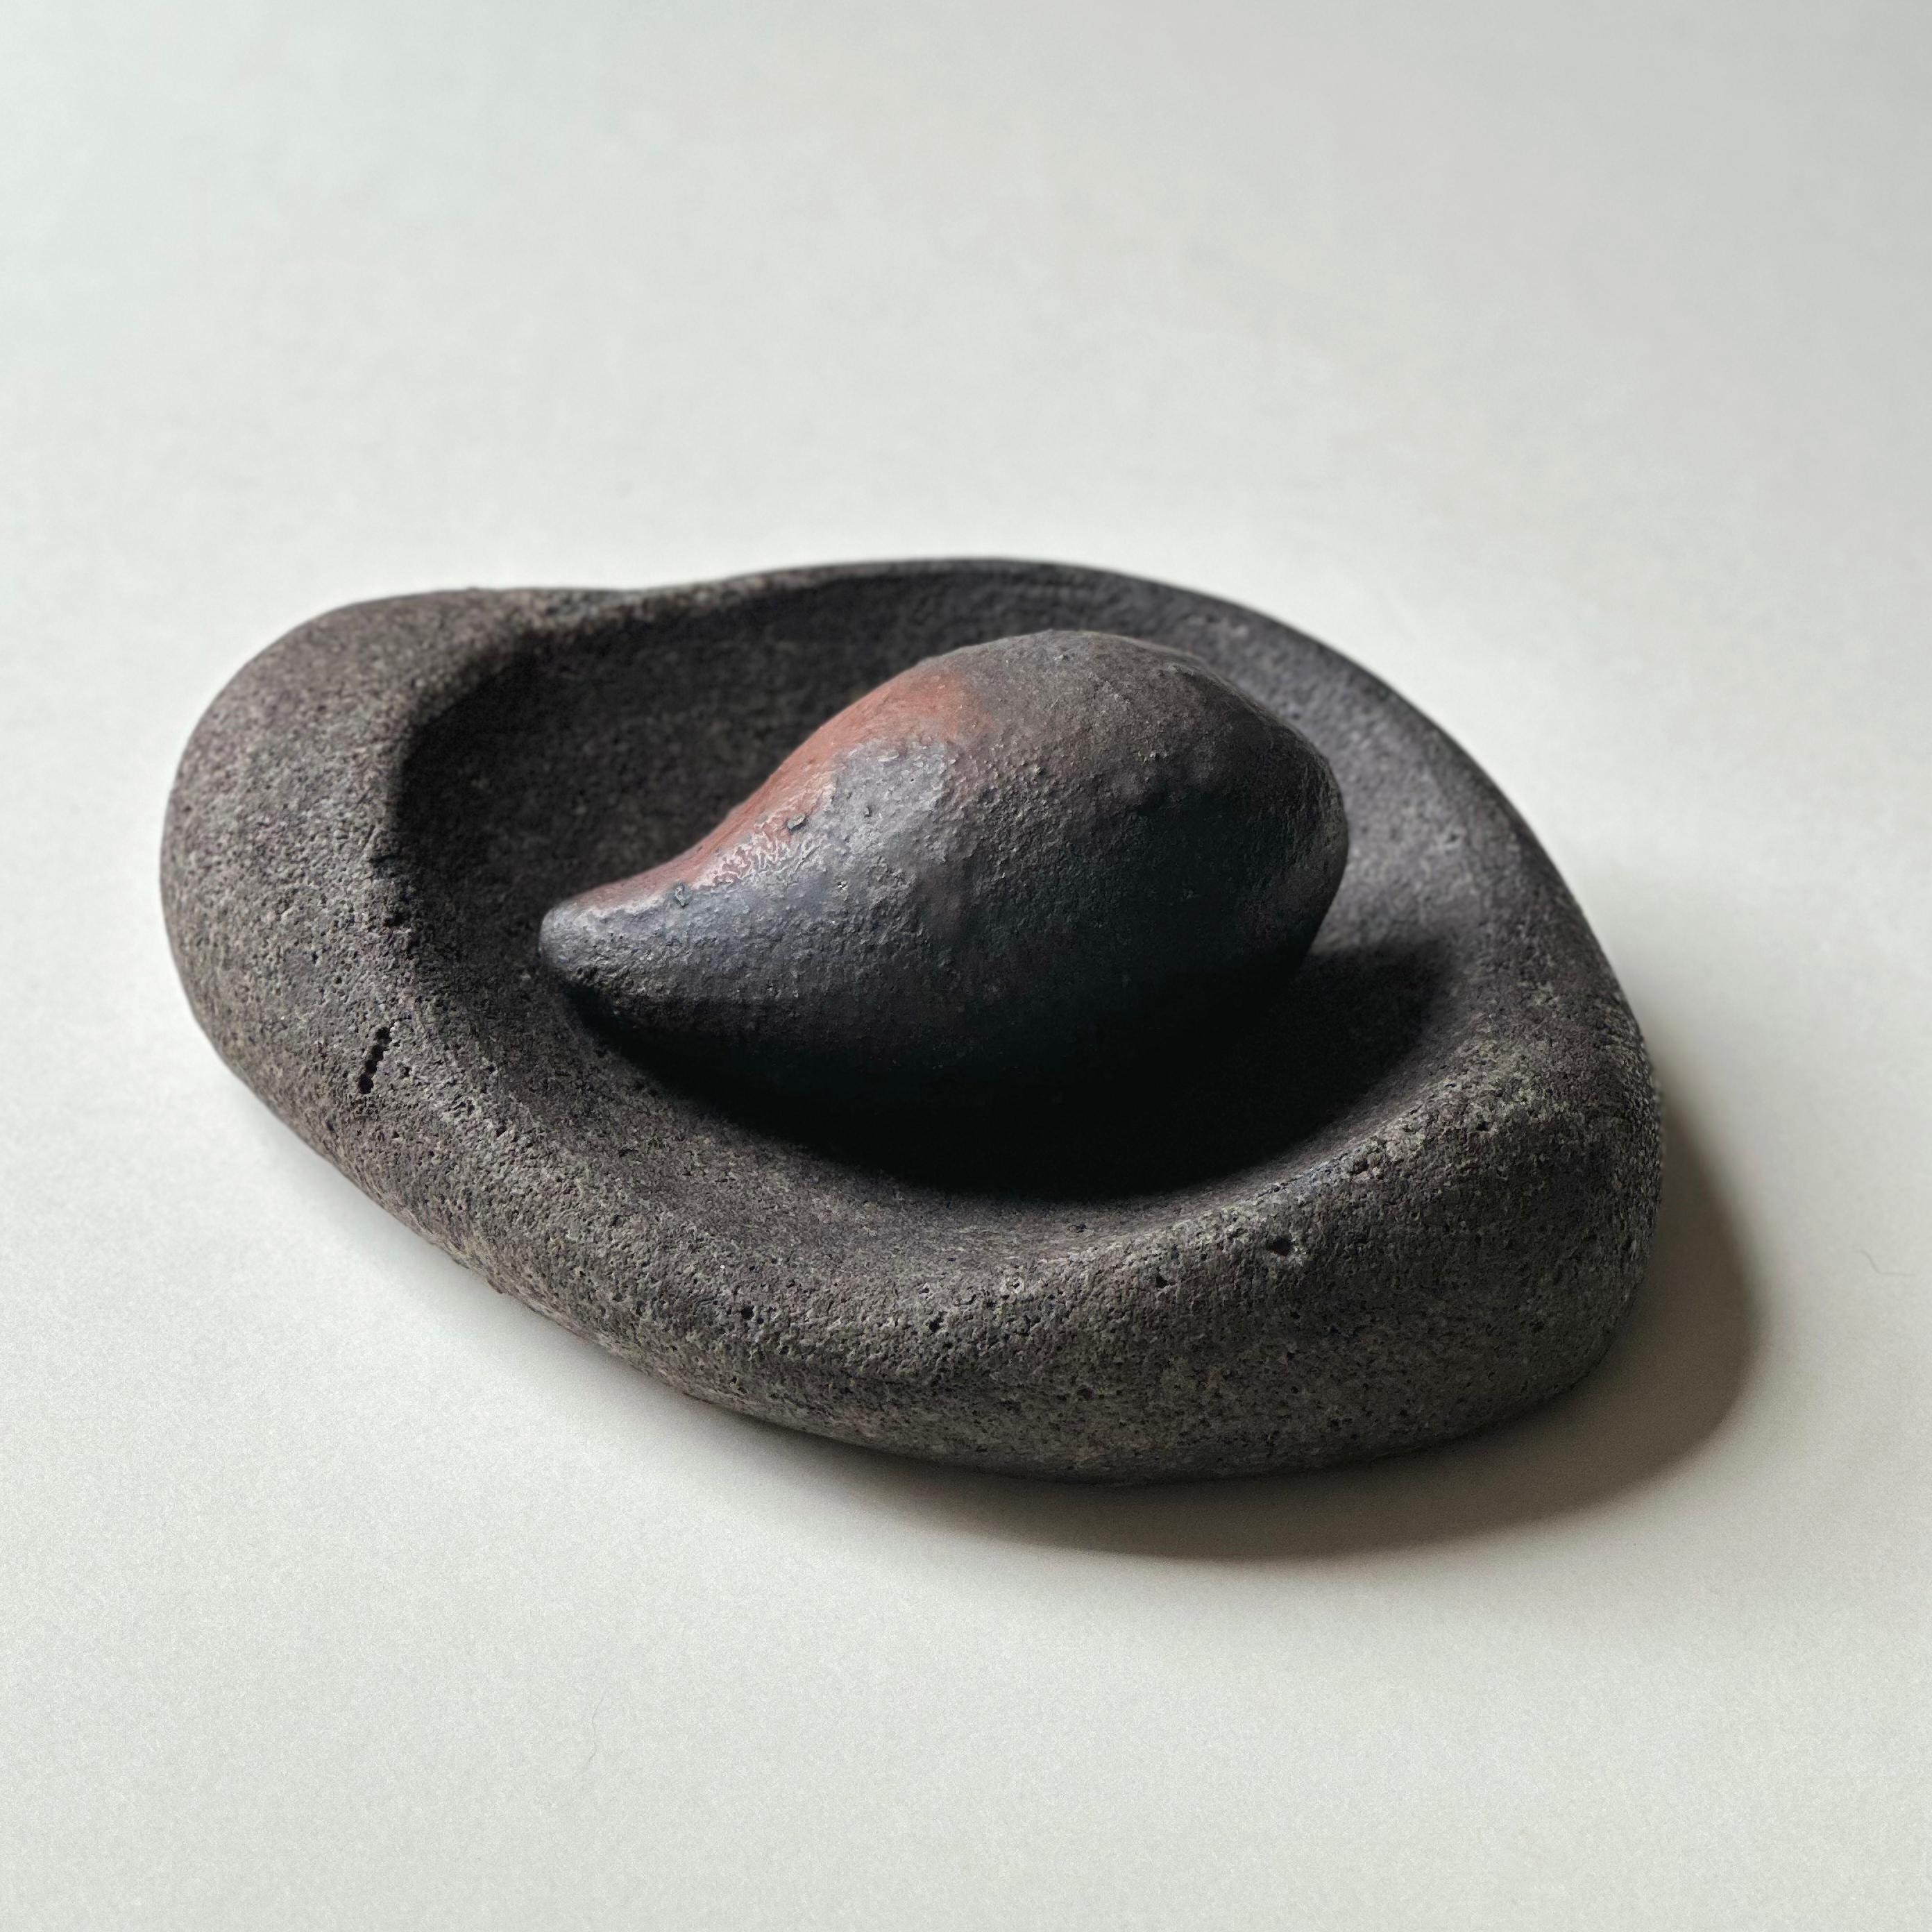 Free-form, wood-fired mortar and pestle made from blended clays hand-collected by the artist in Minnesota and California. Both signed with the artist’s mark. Food safe.

Mortar: 2 x 8 x 6.25